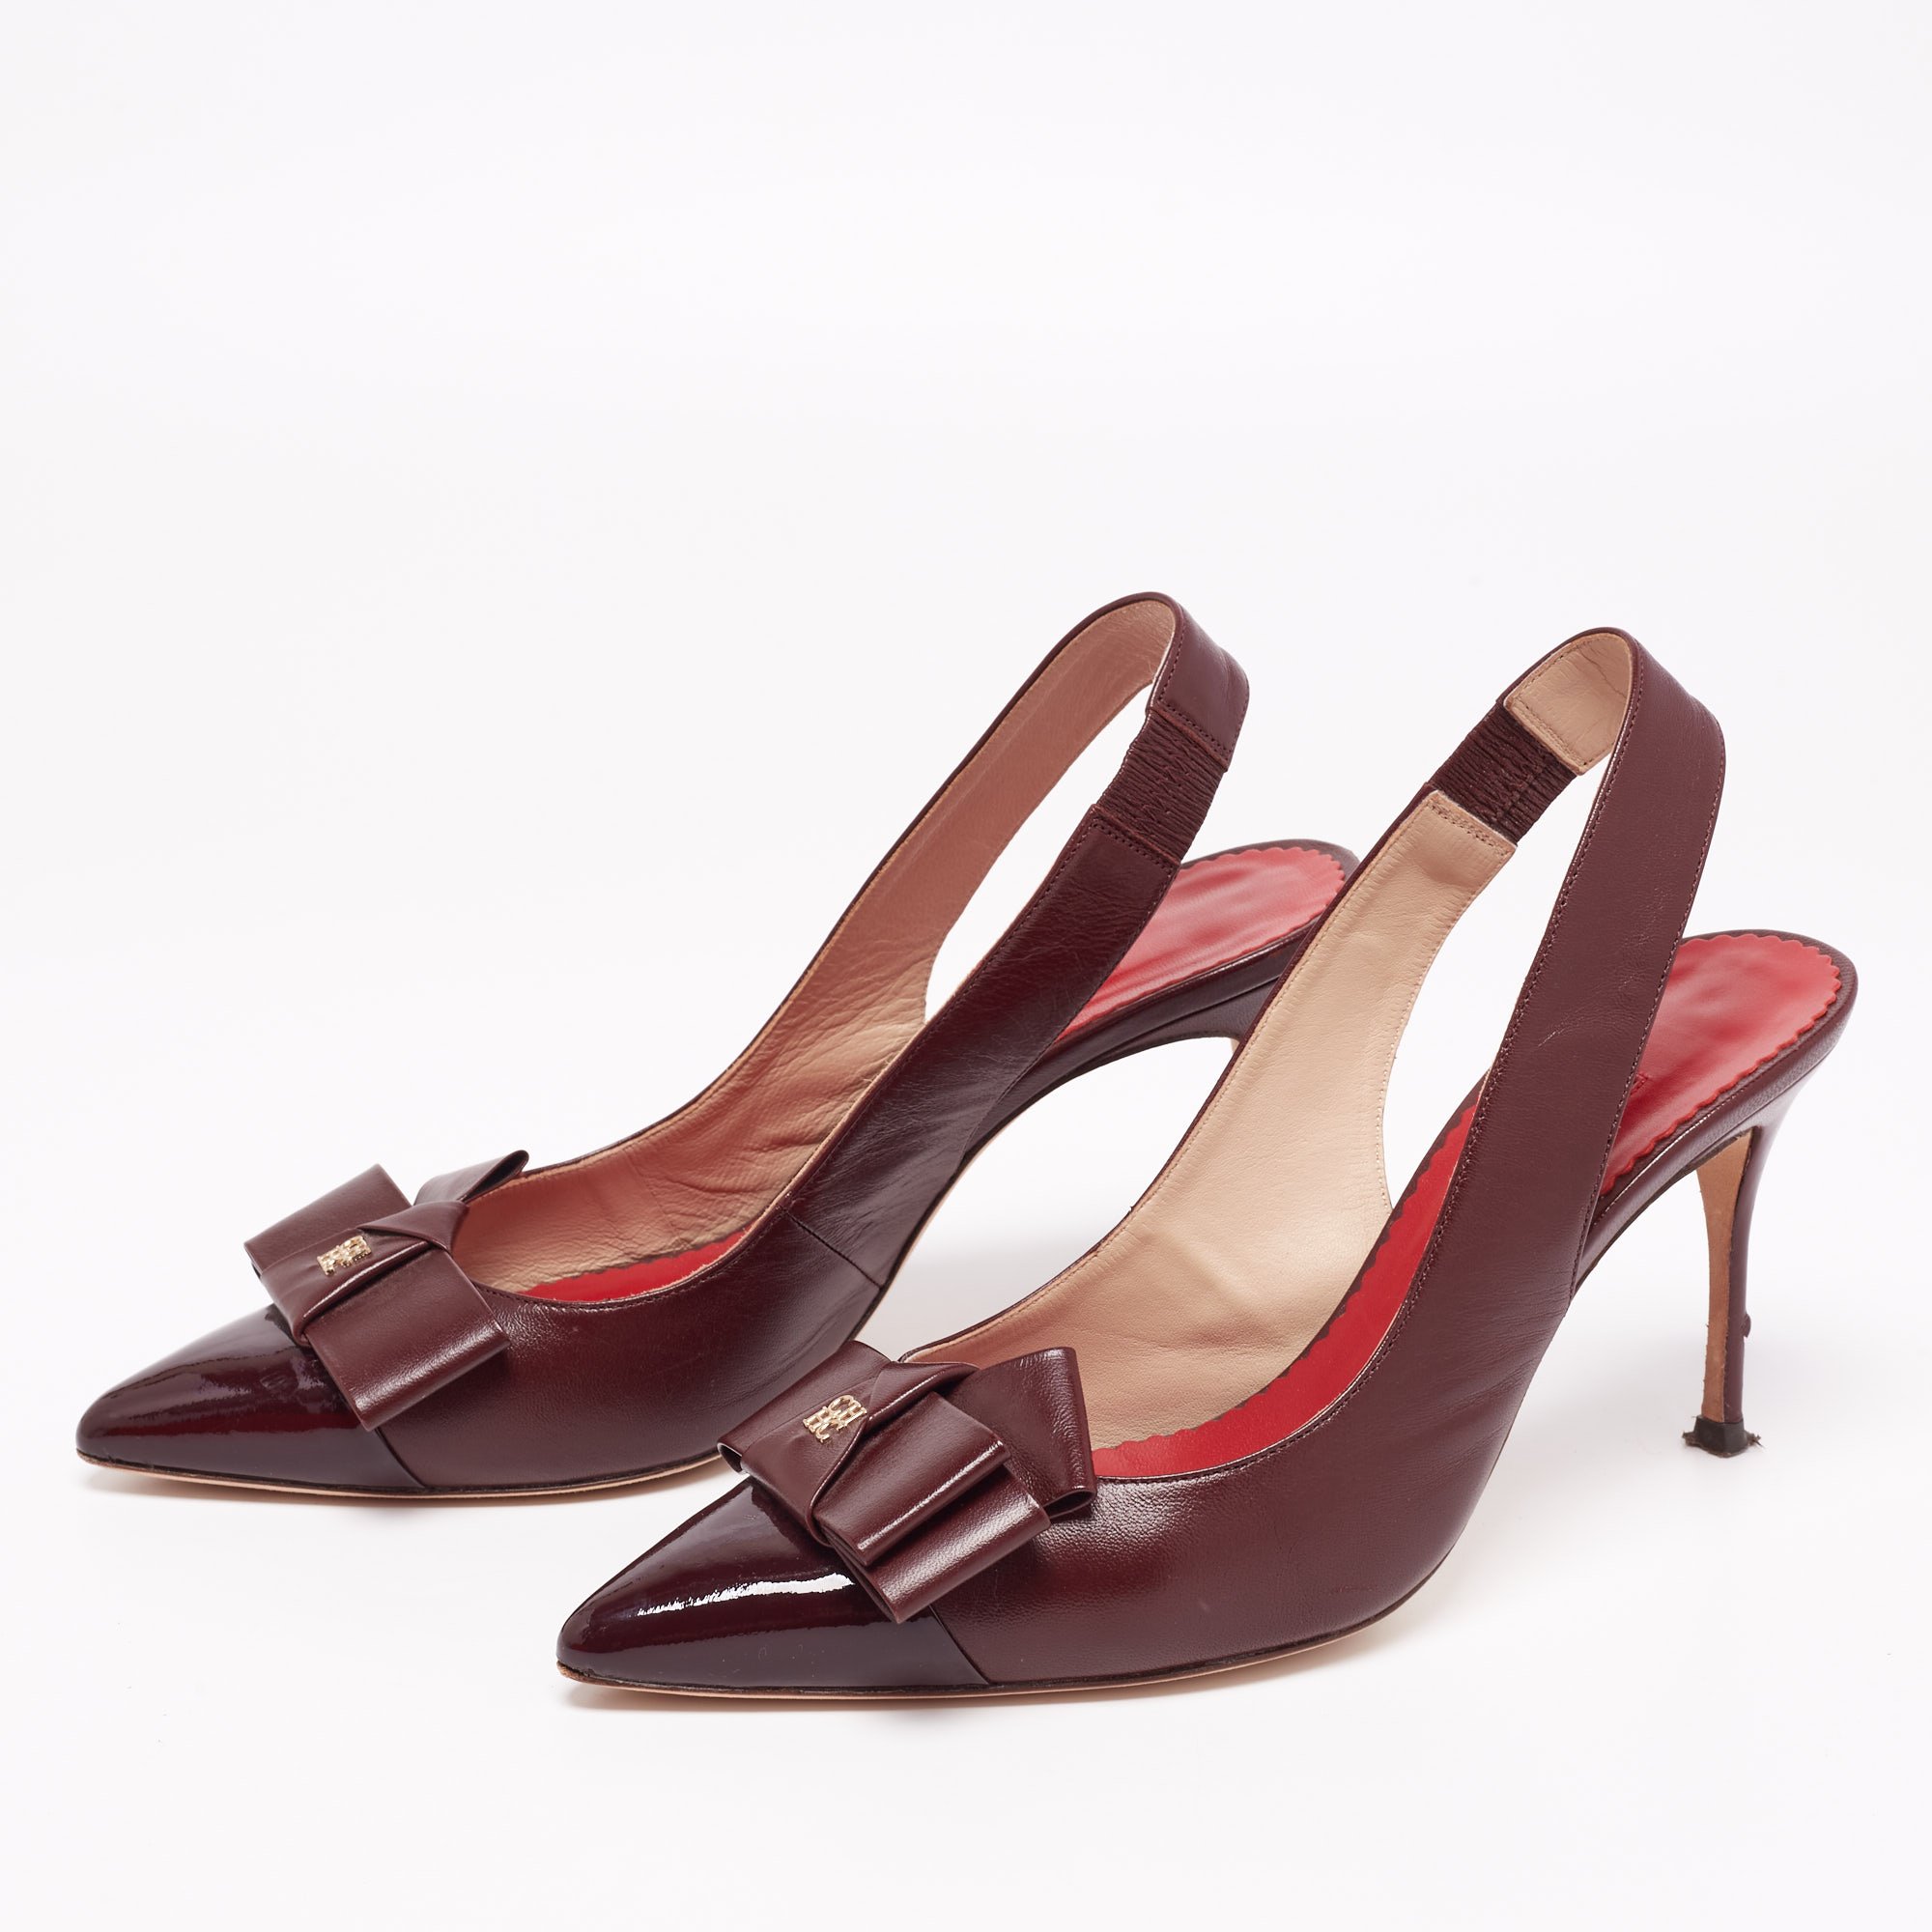 

CH Carolina Herrera Burgundy Leather And Patent Bow Detail Pointed-Toe Slingback Sandals Size